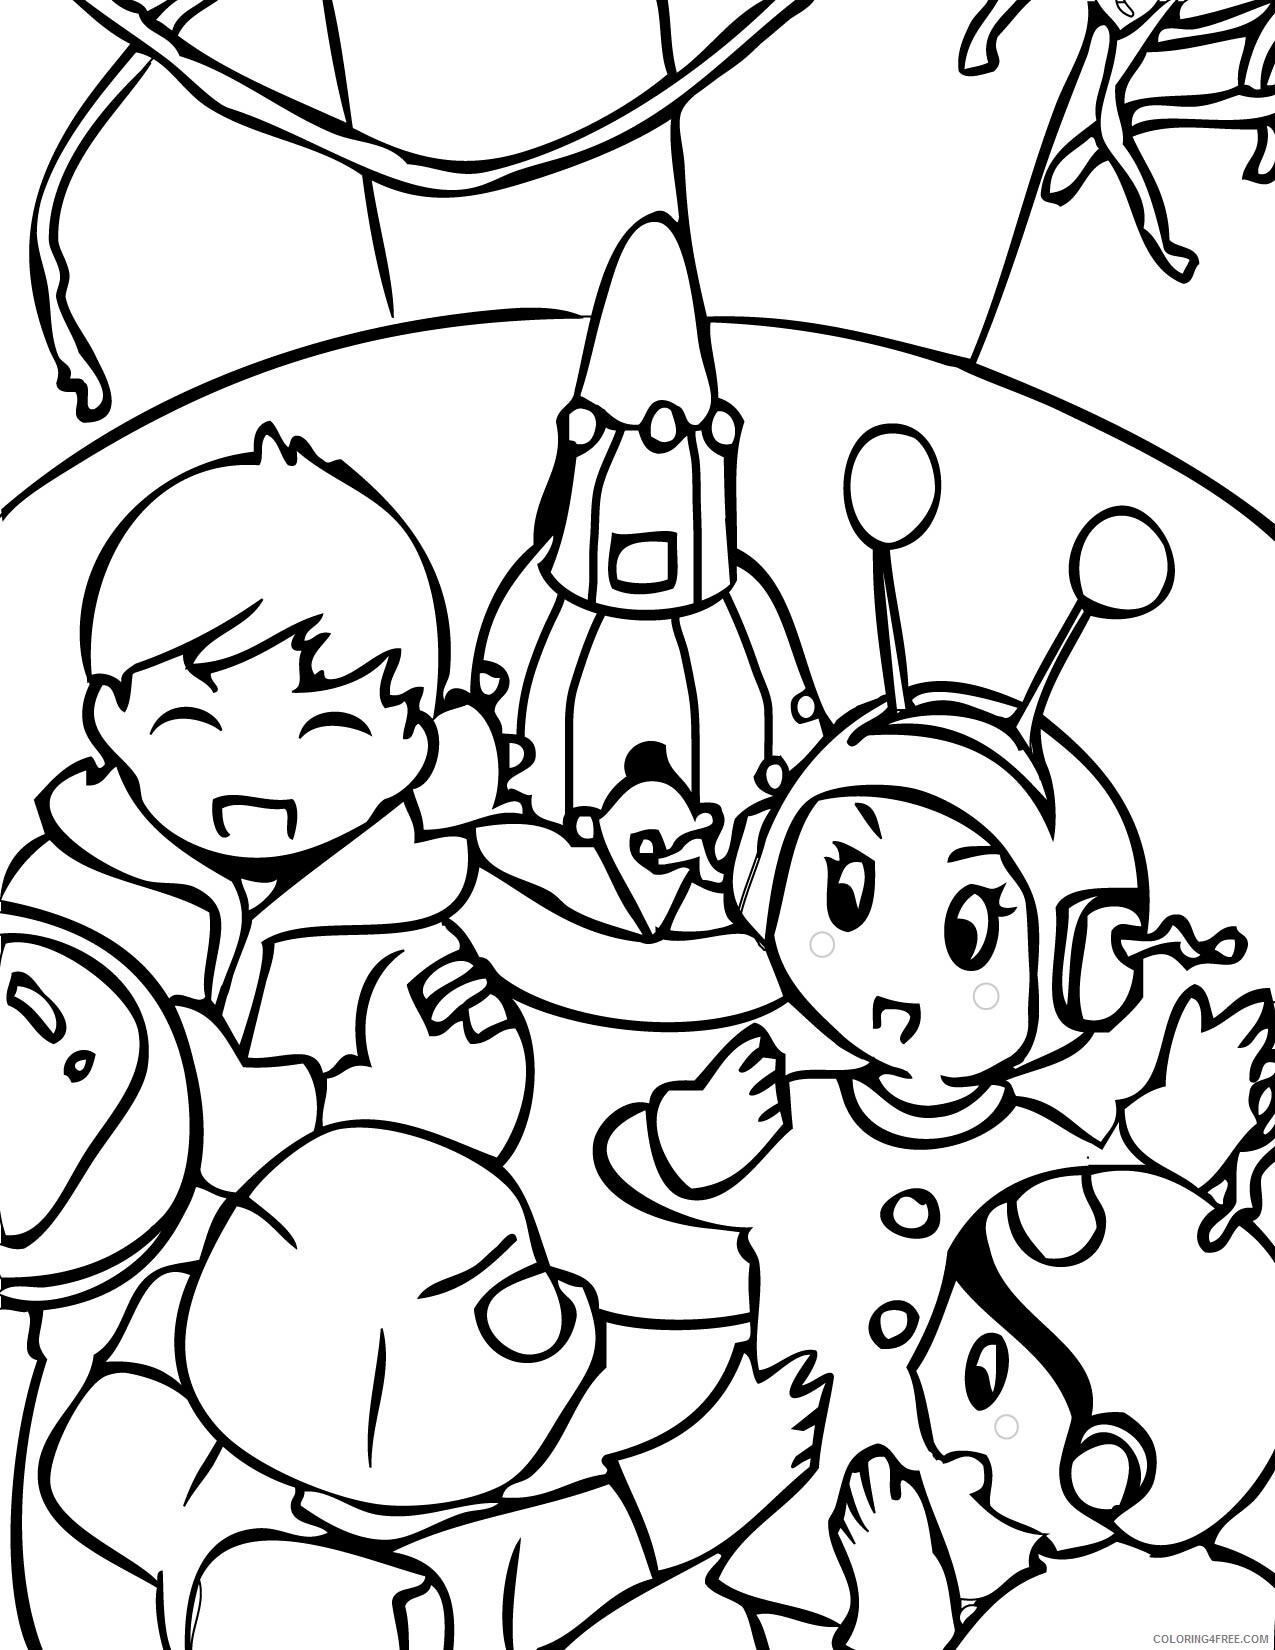 Alien Coloring Pages Alien Party Printable 2021 0125 Coloring4free